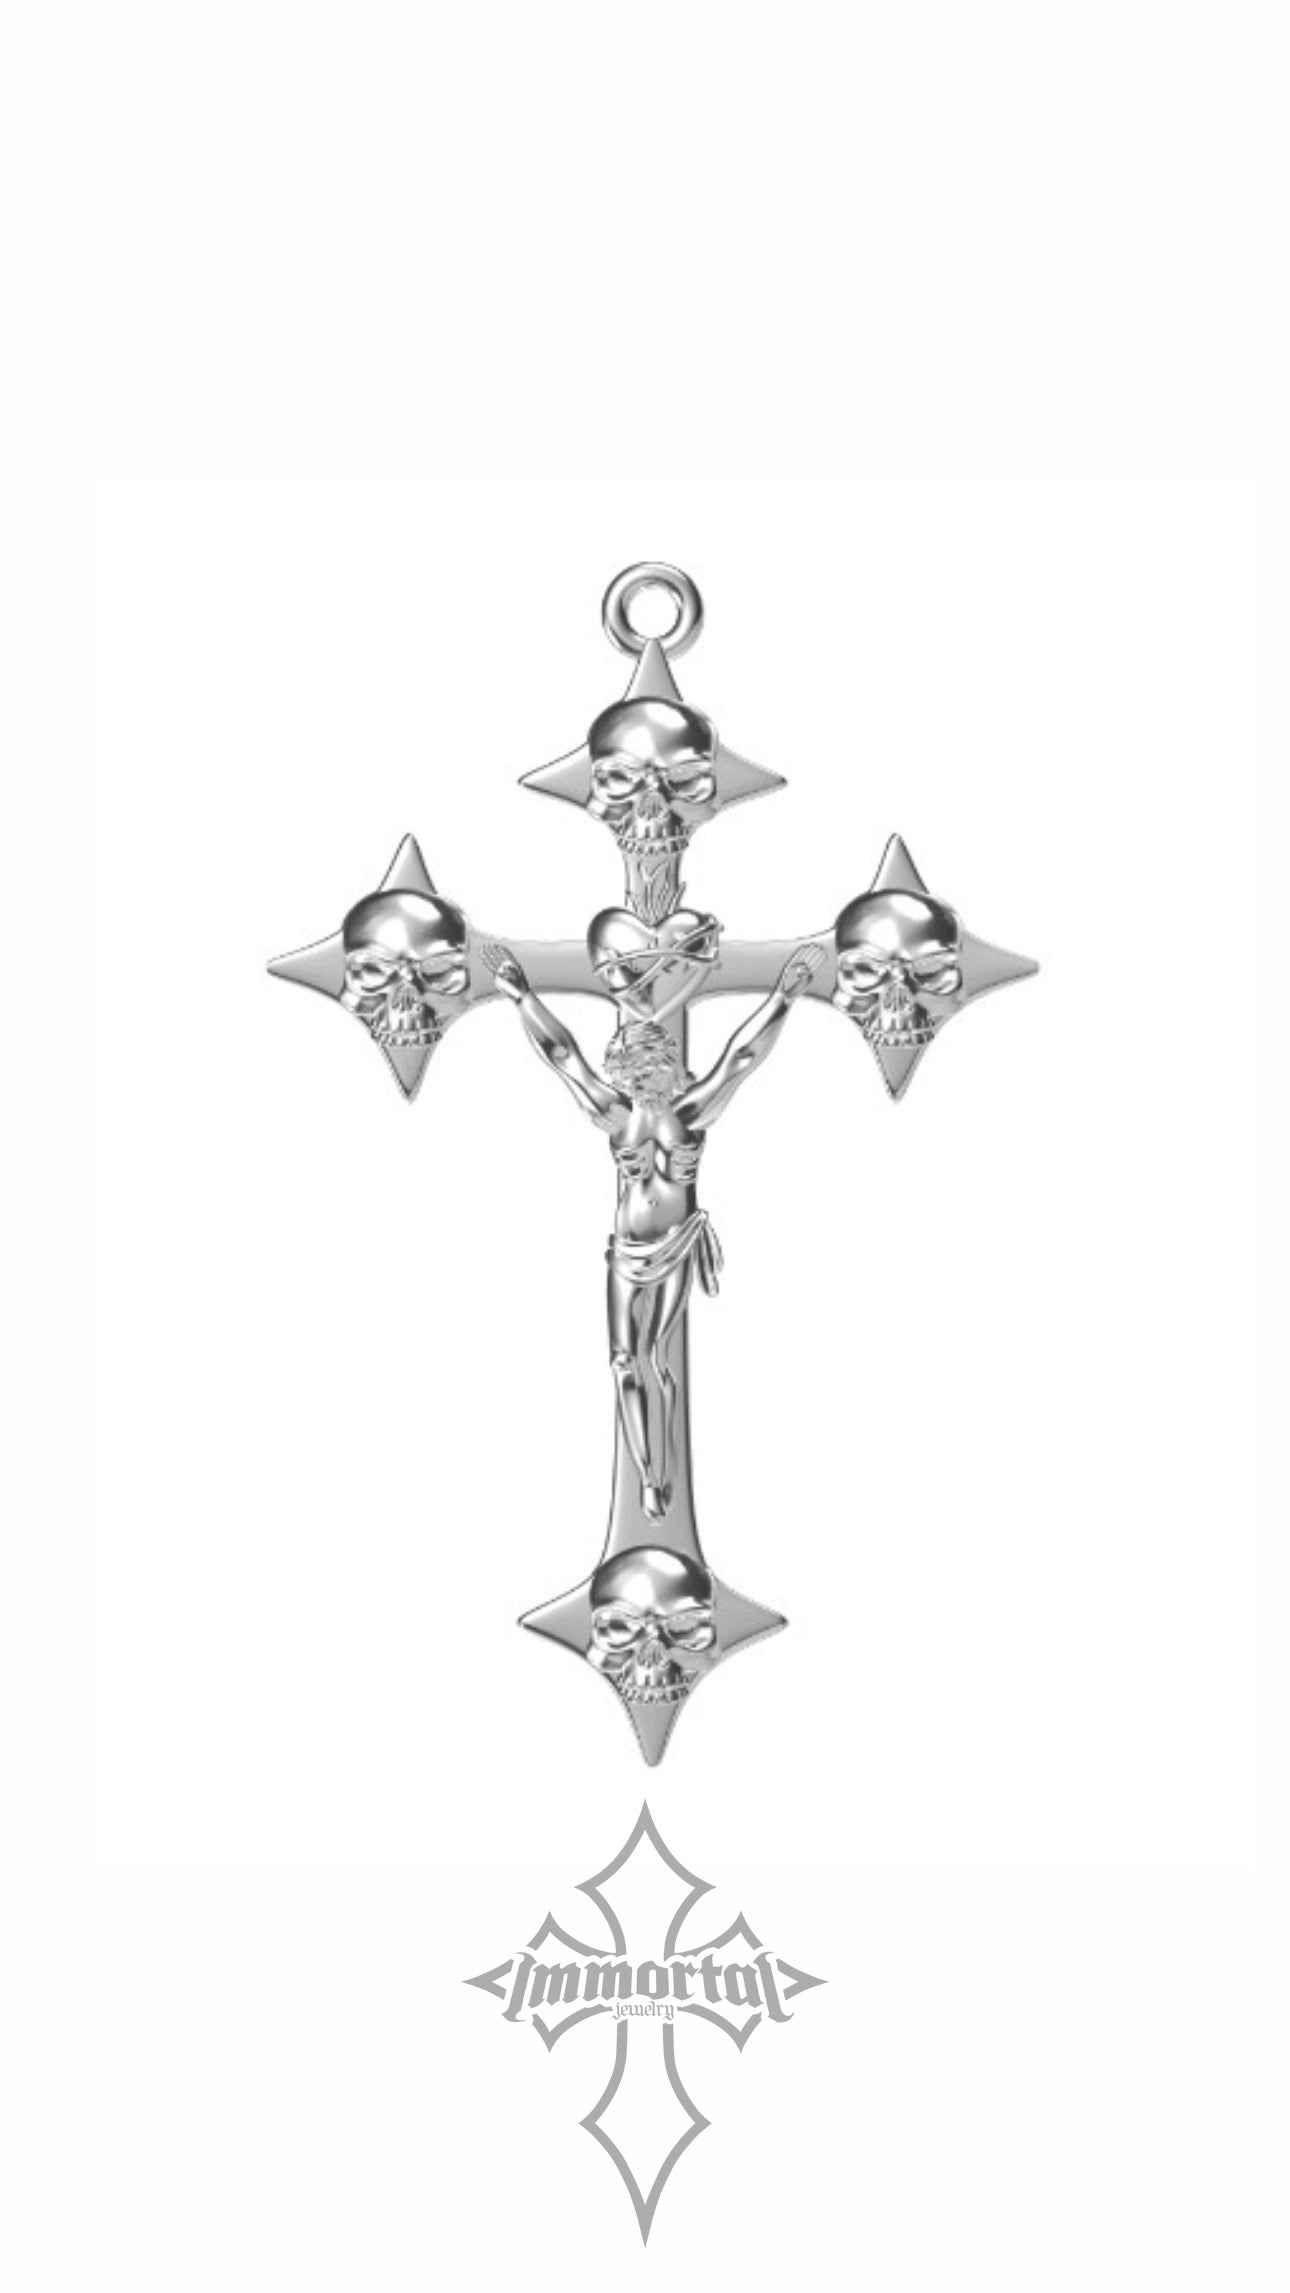 Crucifix pendant with chain necklace by immortal jewelry